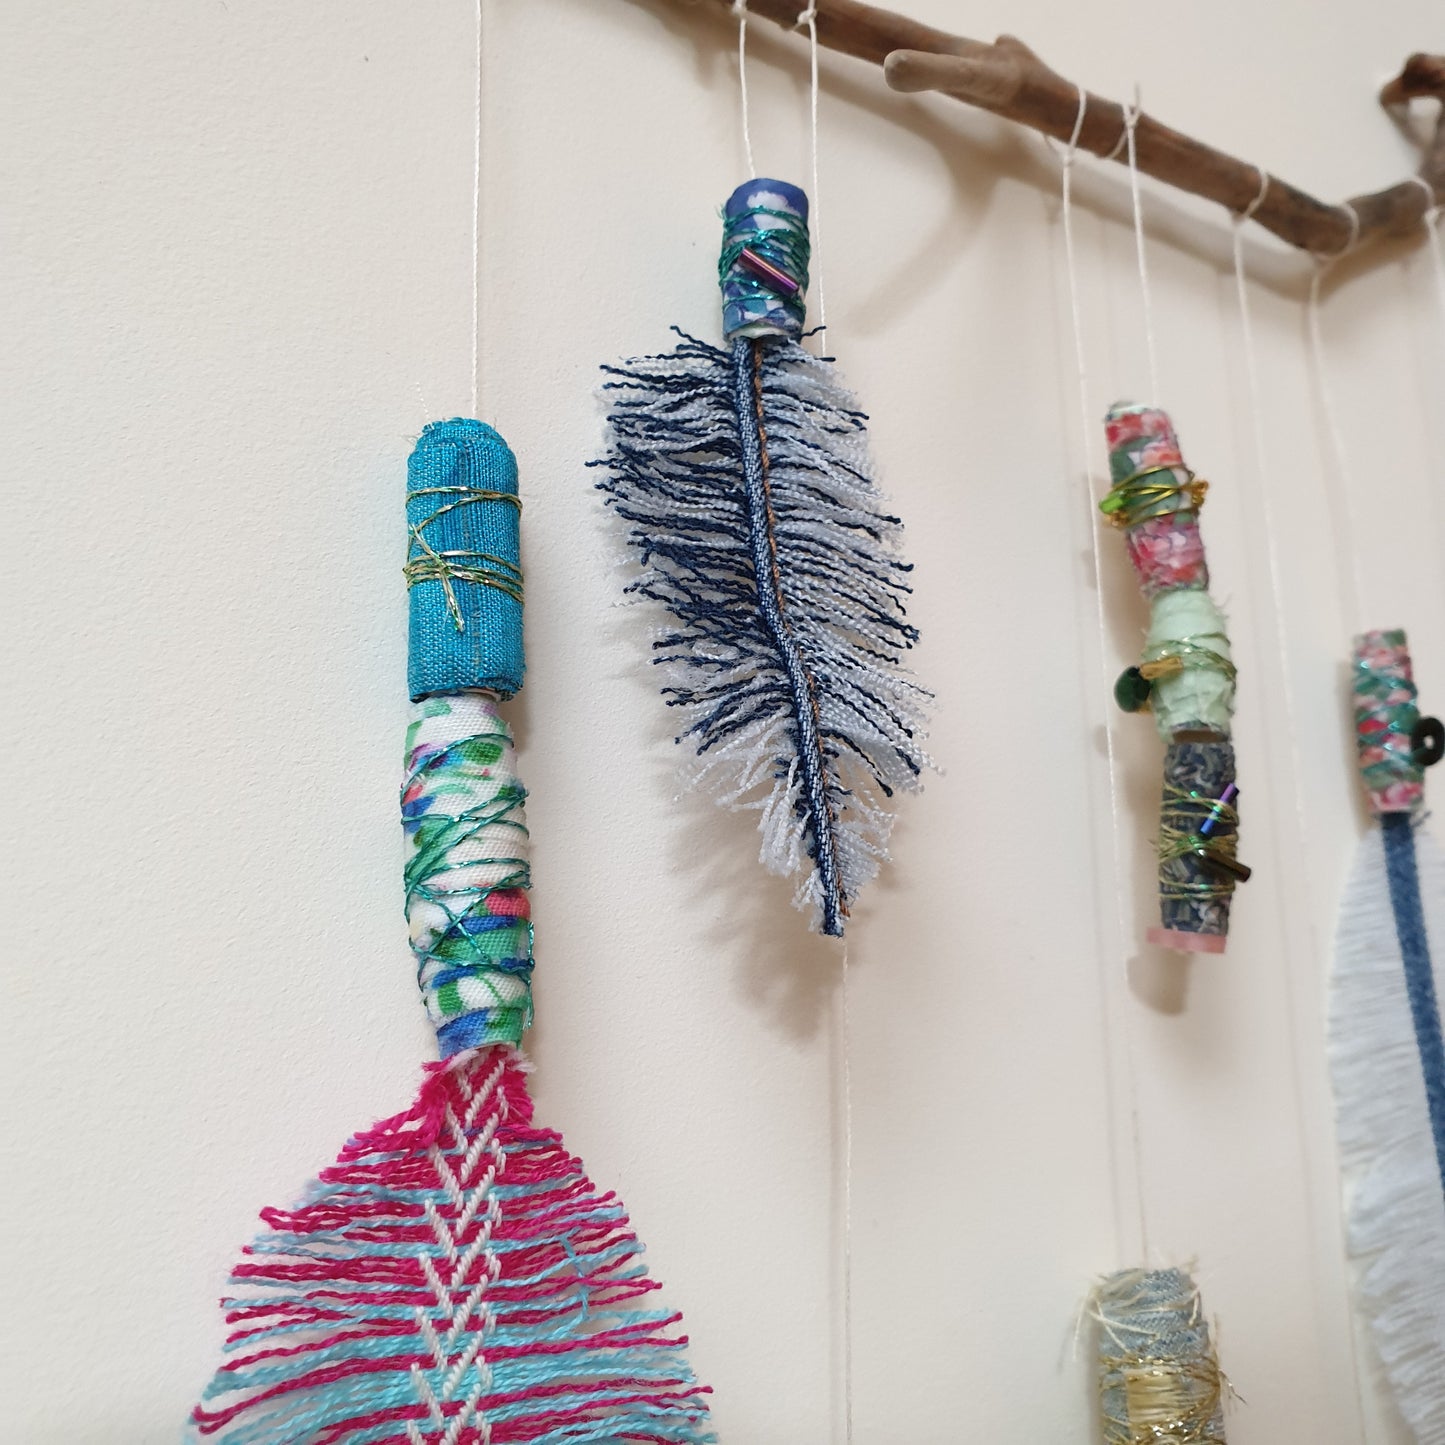 Feathers & Beads Mobile: #peaceandcraft Workshop Project 2020